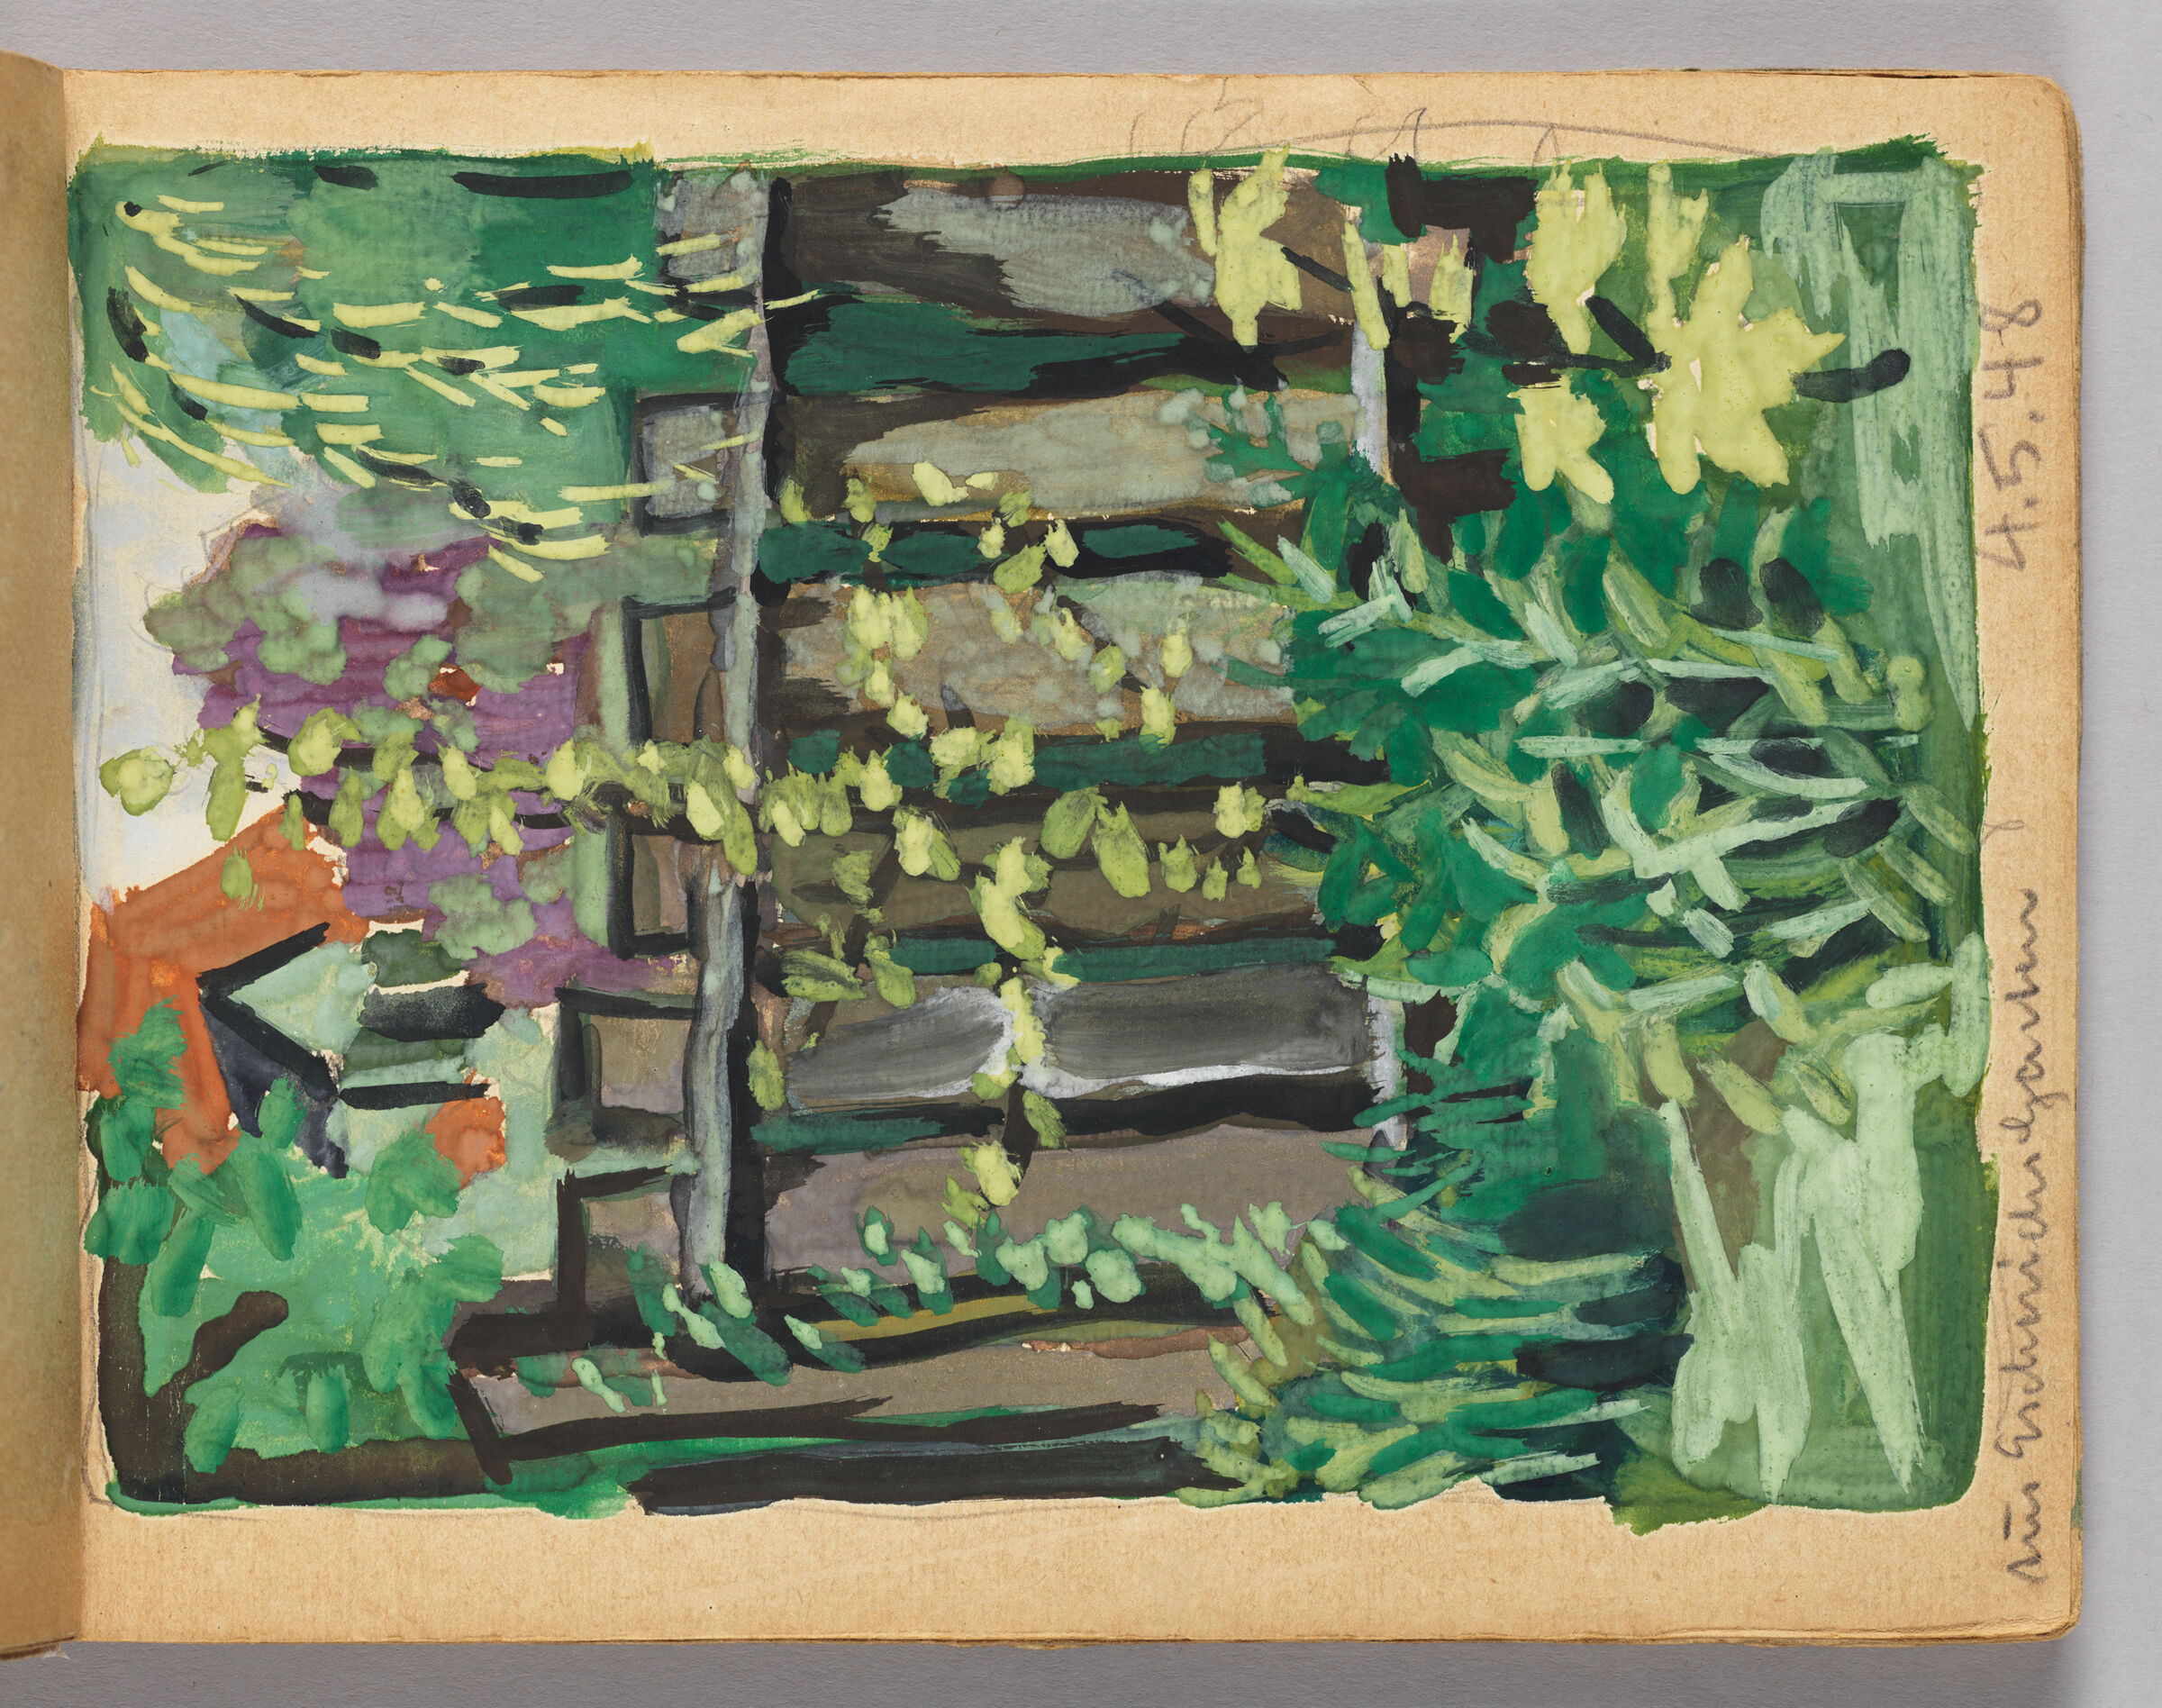 Untitled (Blank, Left Page); Untitled (Garden Scene, Right Page)